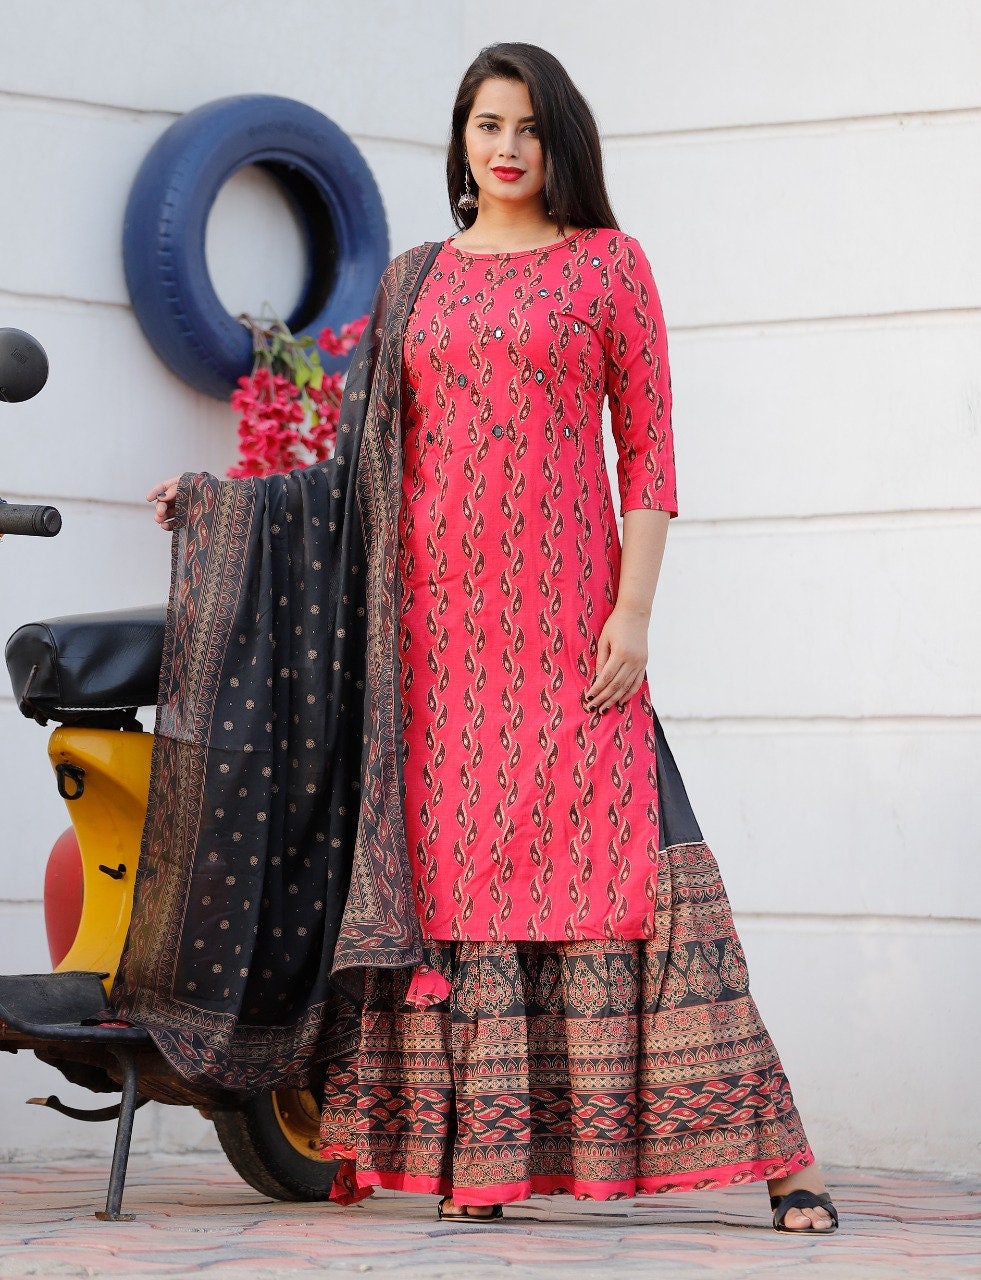 Shop Long Kurti With Skirt for Women Online from India's Luxury Designers  2023-thanhphatduhoc.com.vn